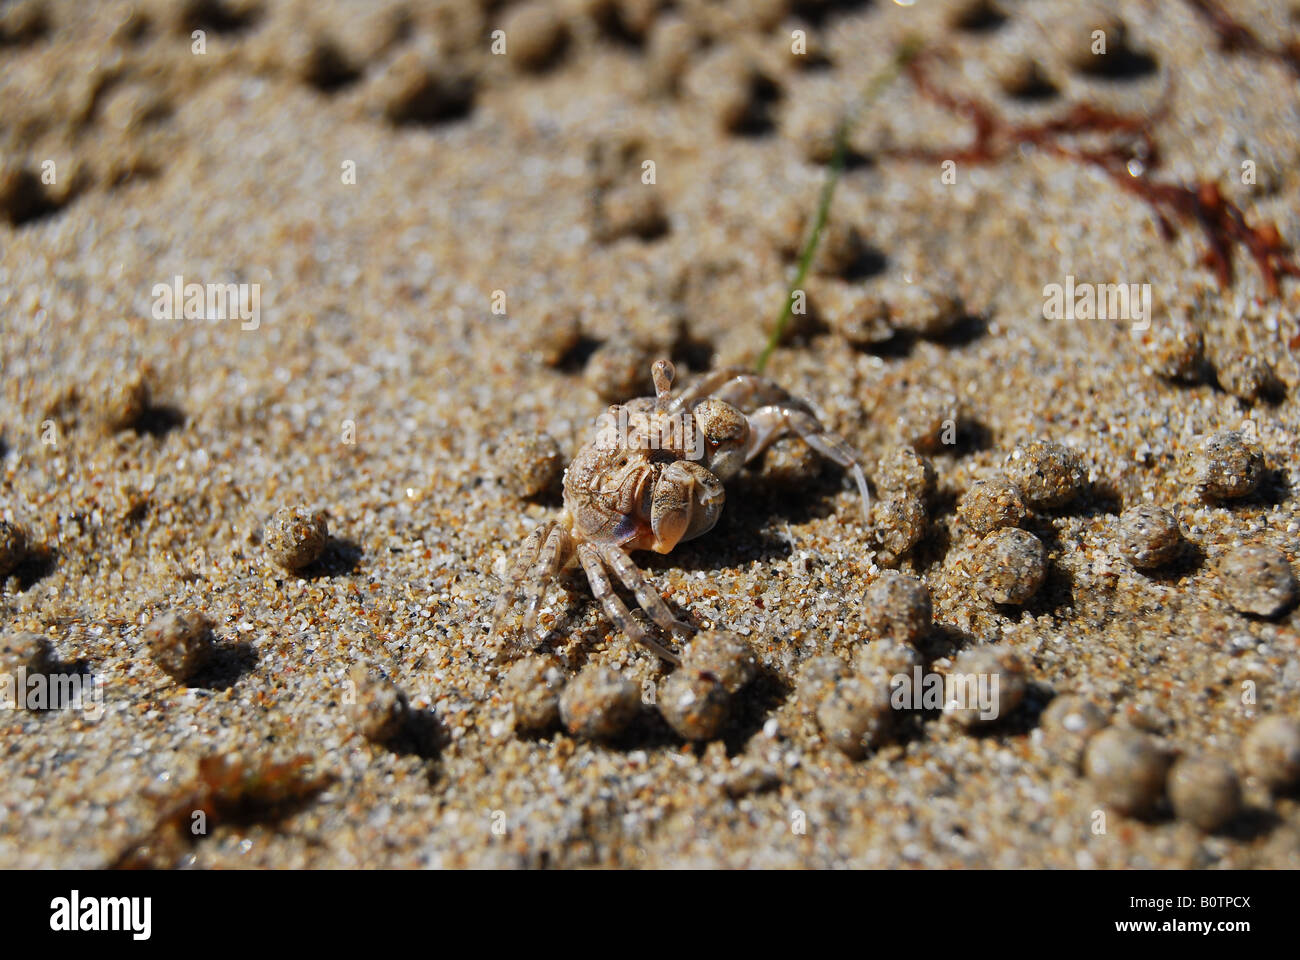 A small crab camoflagued against the sand, taken on four mile beach in Port Douglas, Queensland, Australia Stock Photo